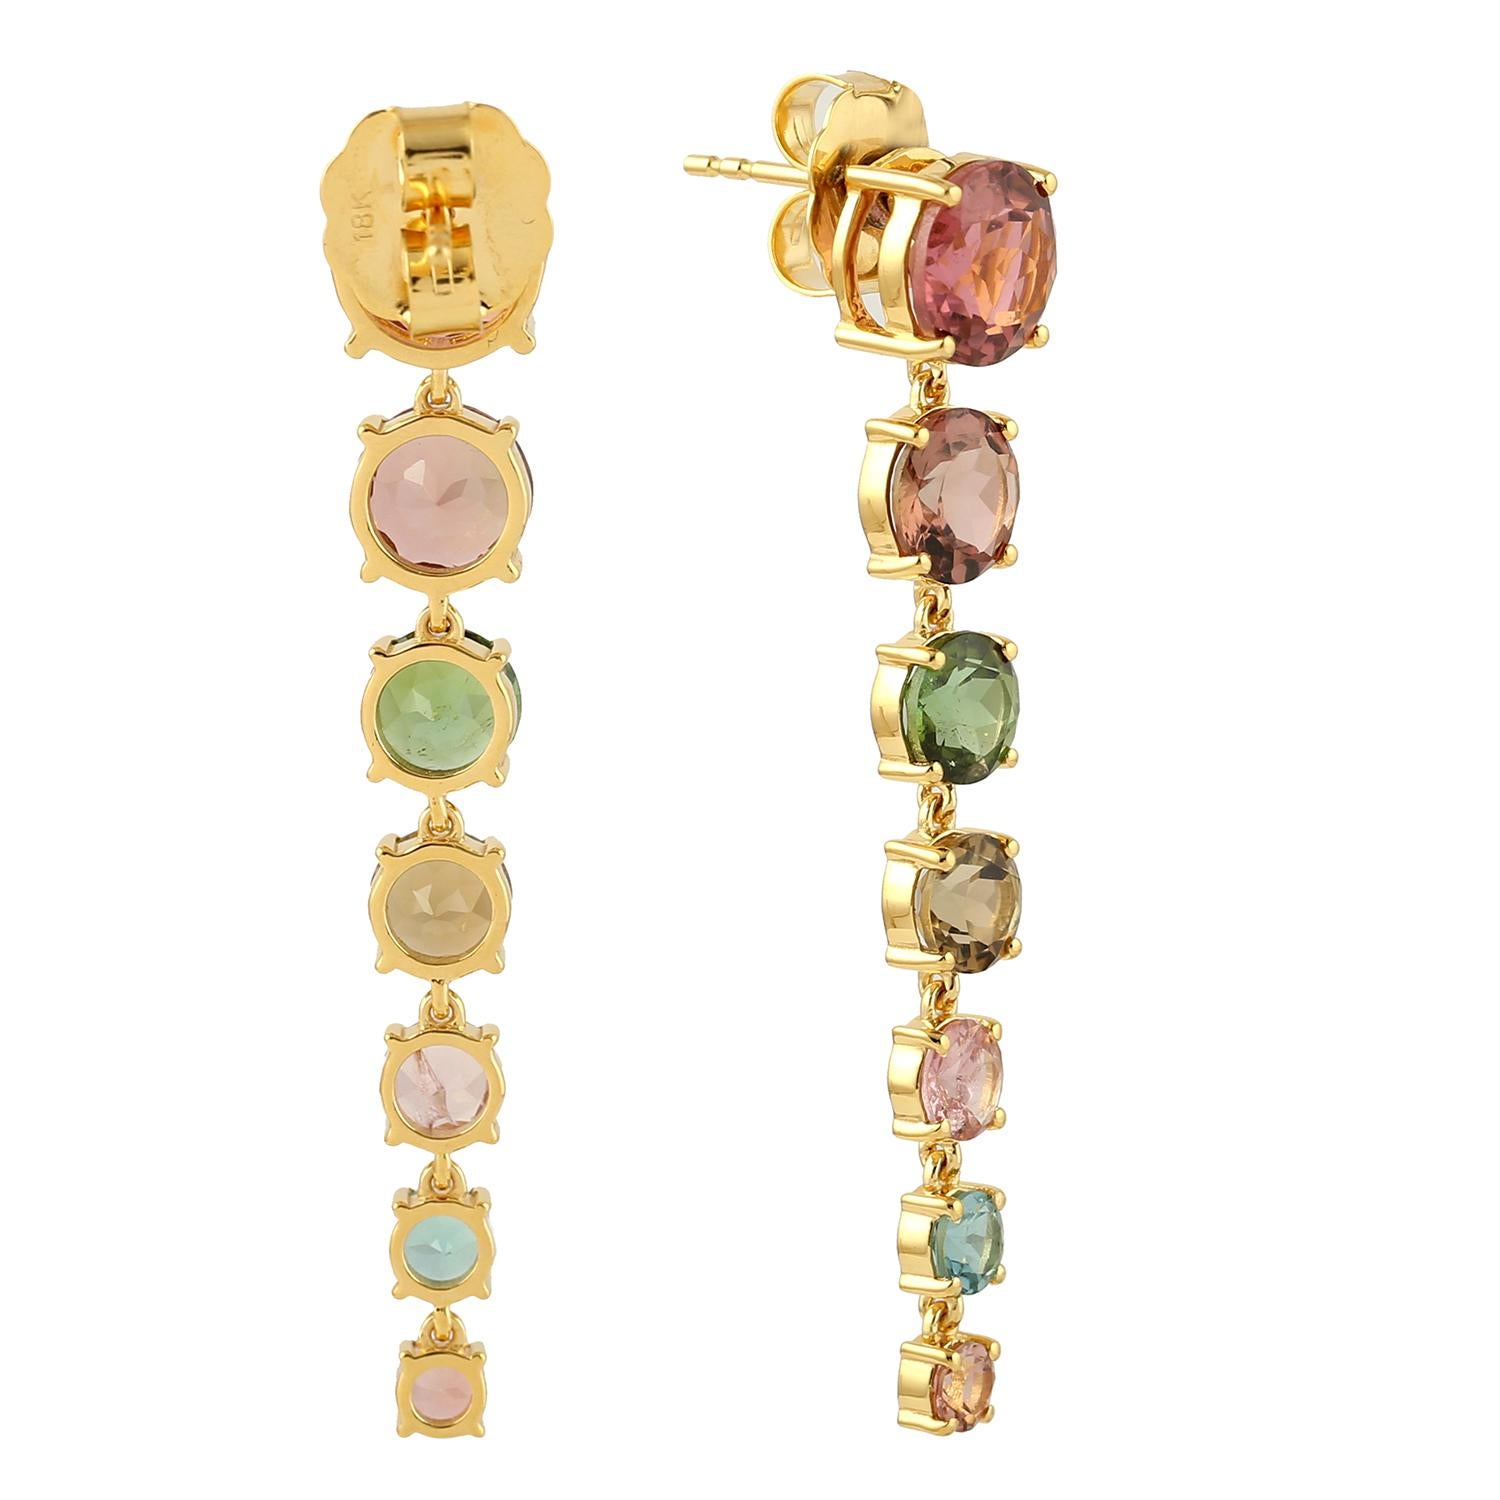 Contemporary 18.75 ct Multicolored Round Tourmaline Dangle Earrings Made In 18k Yellow Gold For Sale